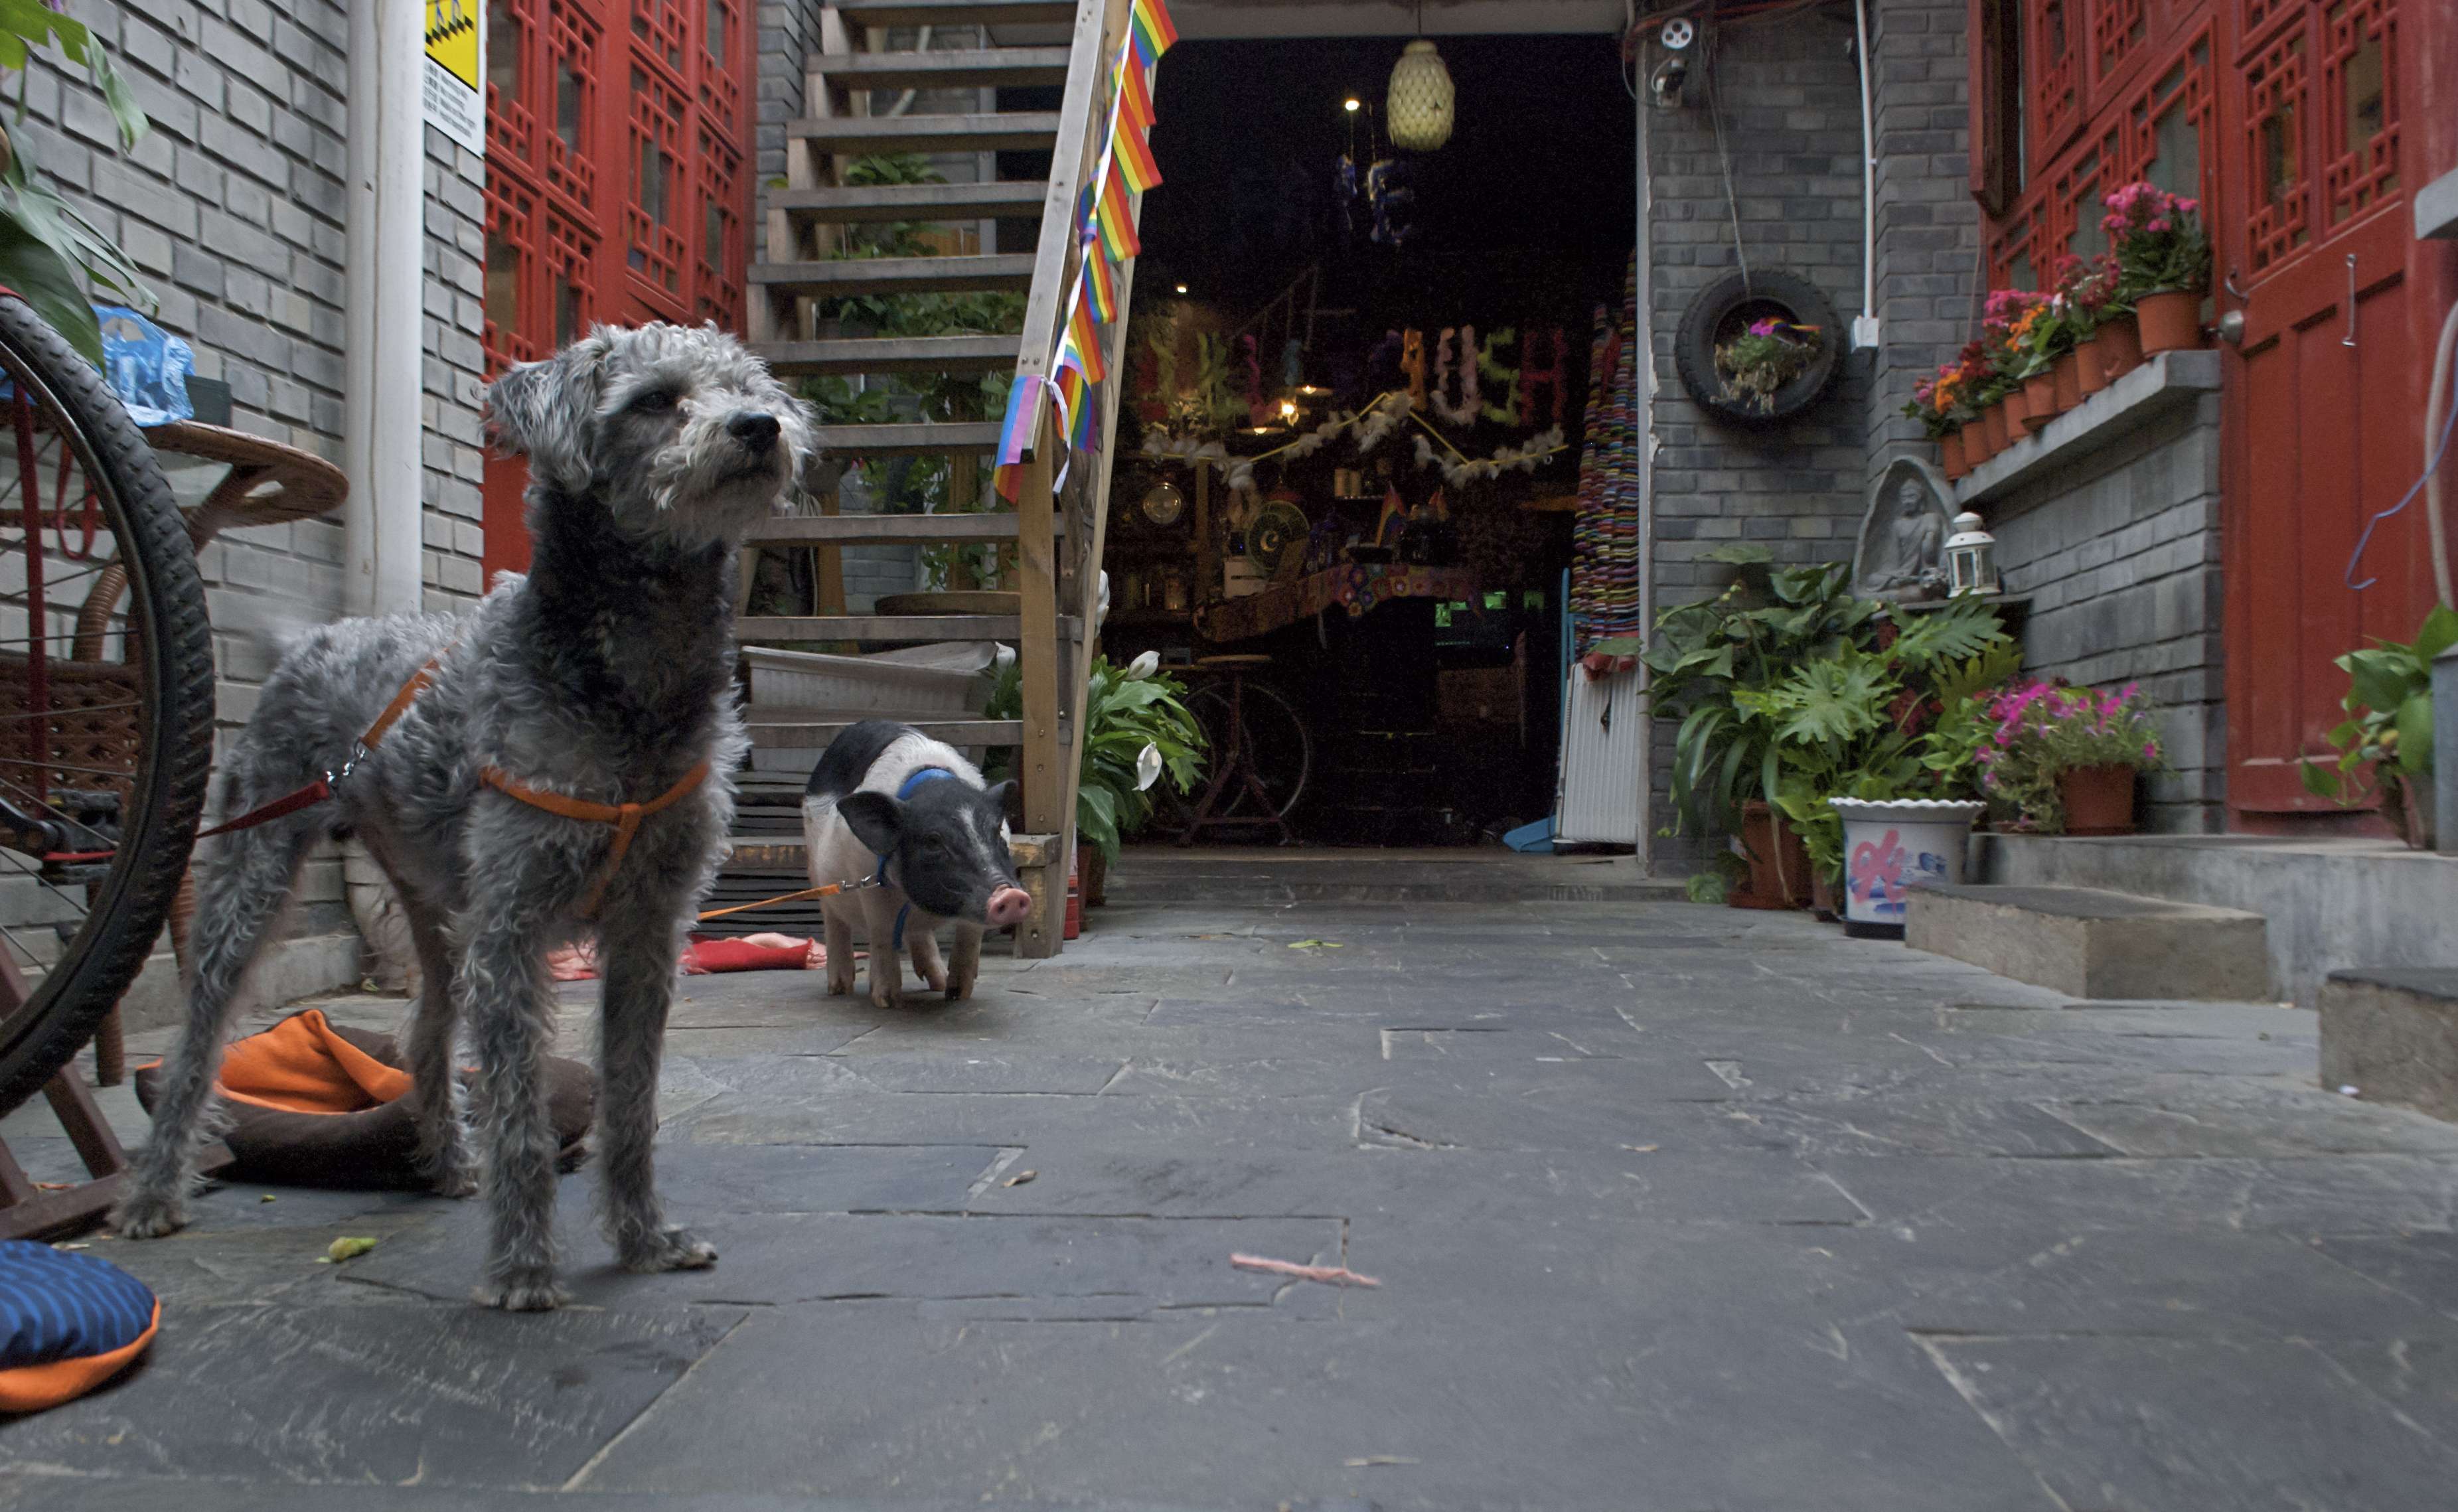 The entrance to Chilli Crush, with resident dog and pig greeting patrons, in Beijing. Photos: Bibek Bhandari.